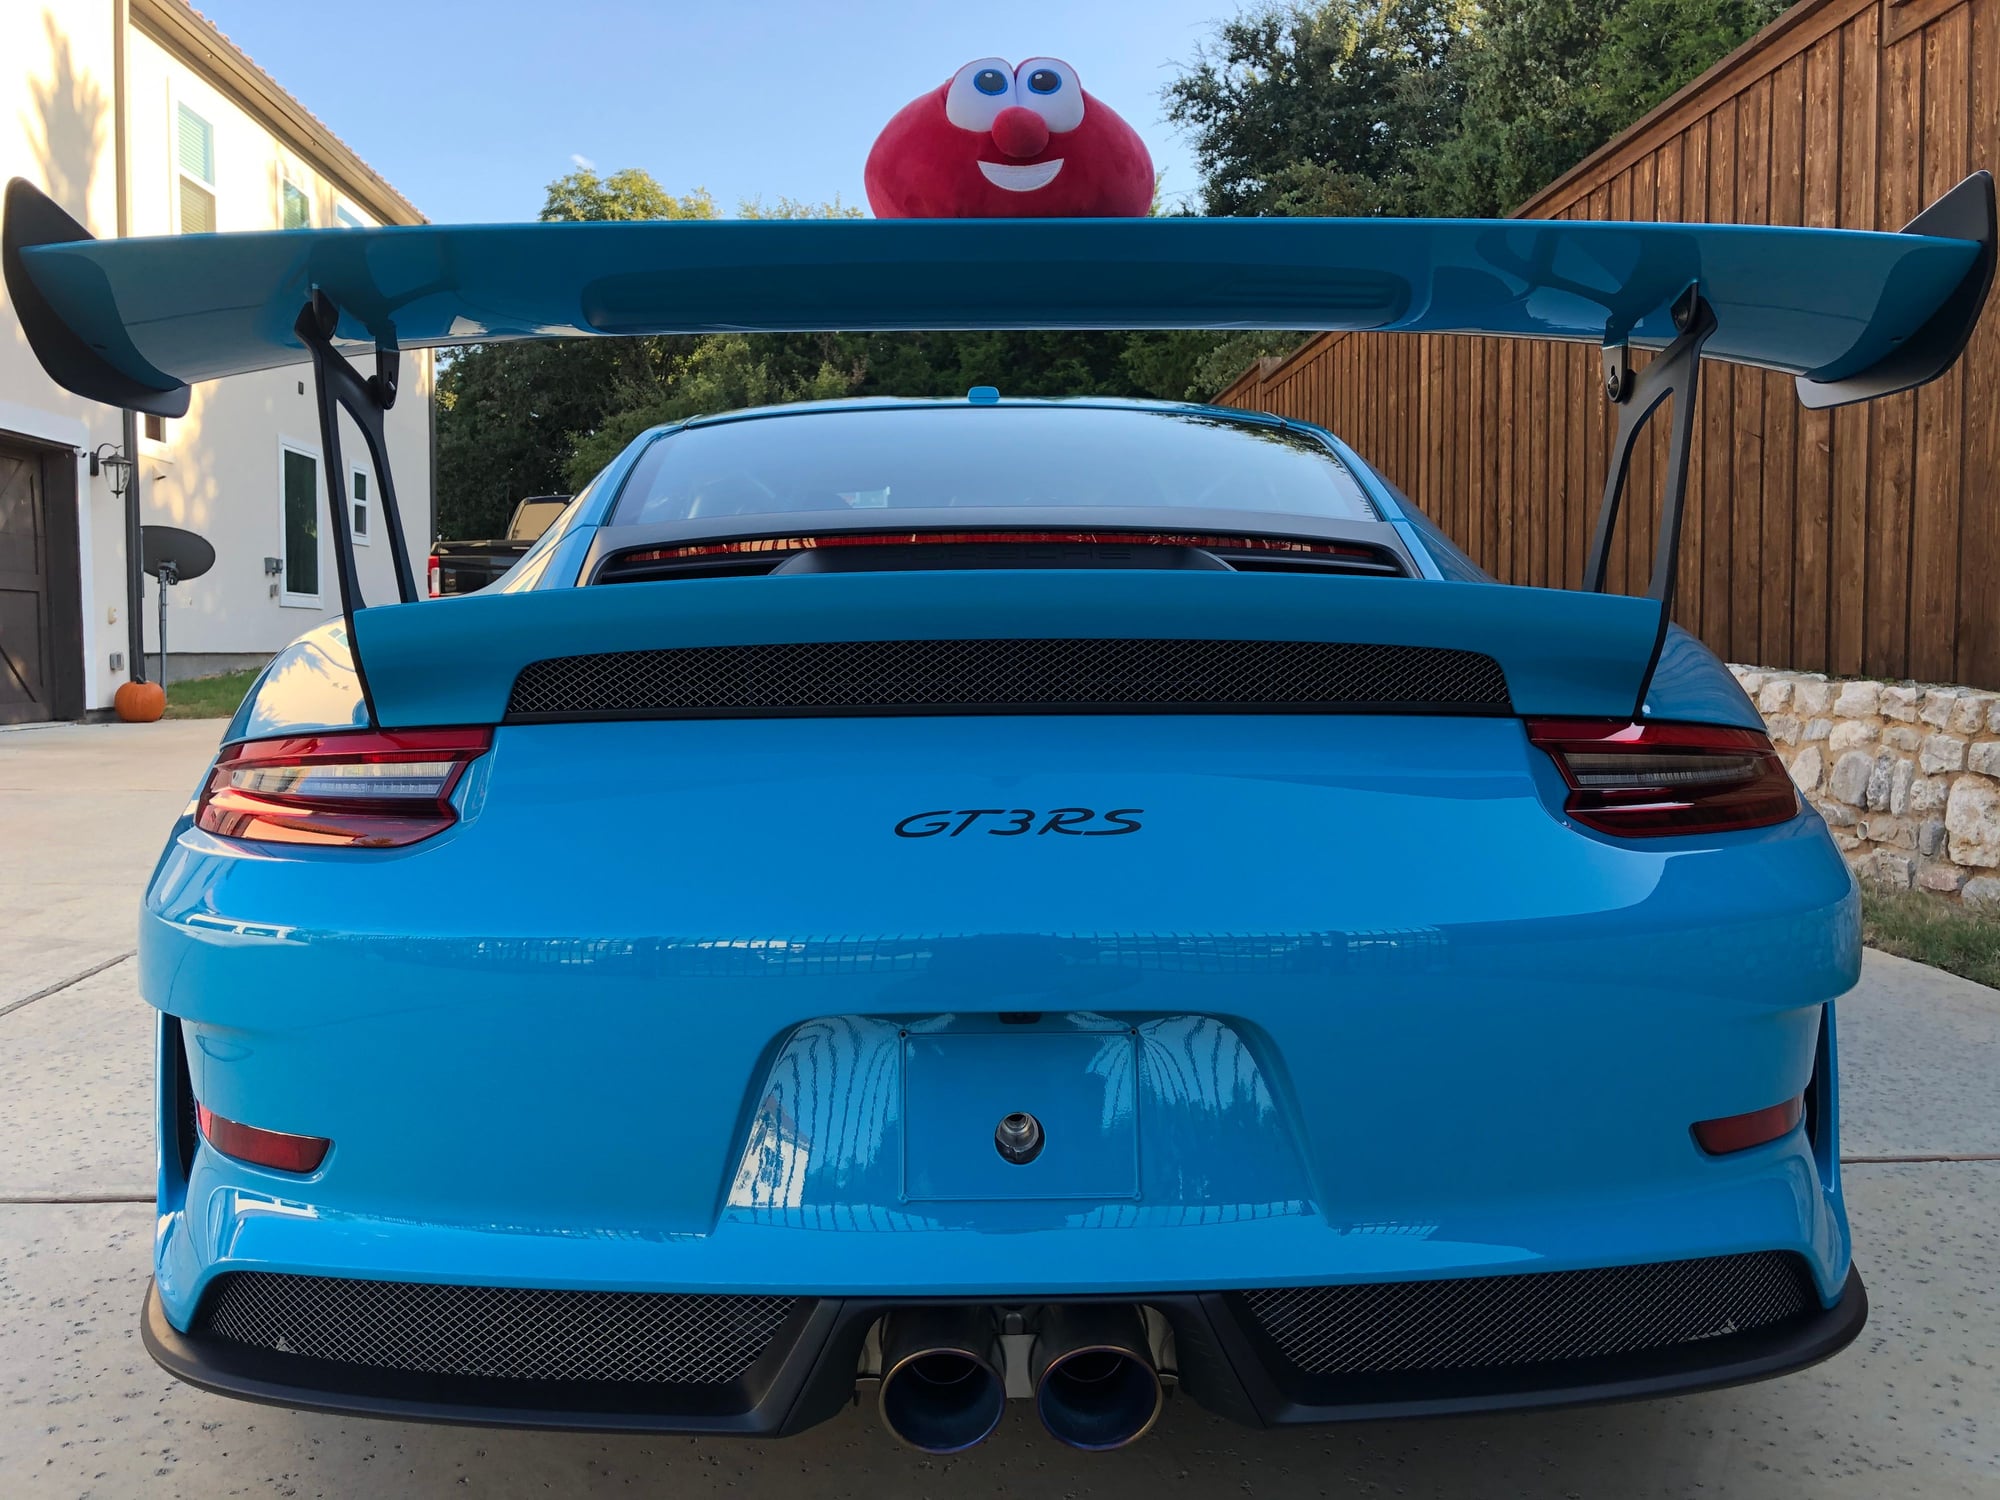 2019 Porsche 911 - FS:  Miami Blue 2019 GT3 RS - Used - VIN WP0AF2A96KS165425 - 5,731 Miles - 6 cyl - 2WD - Automatic - Coupe - Blue - Dallas, TX 76092, United States